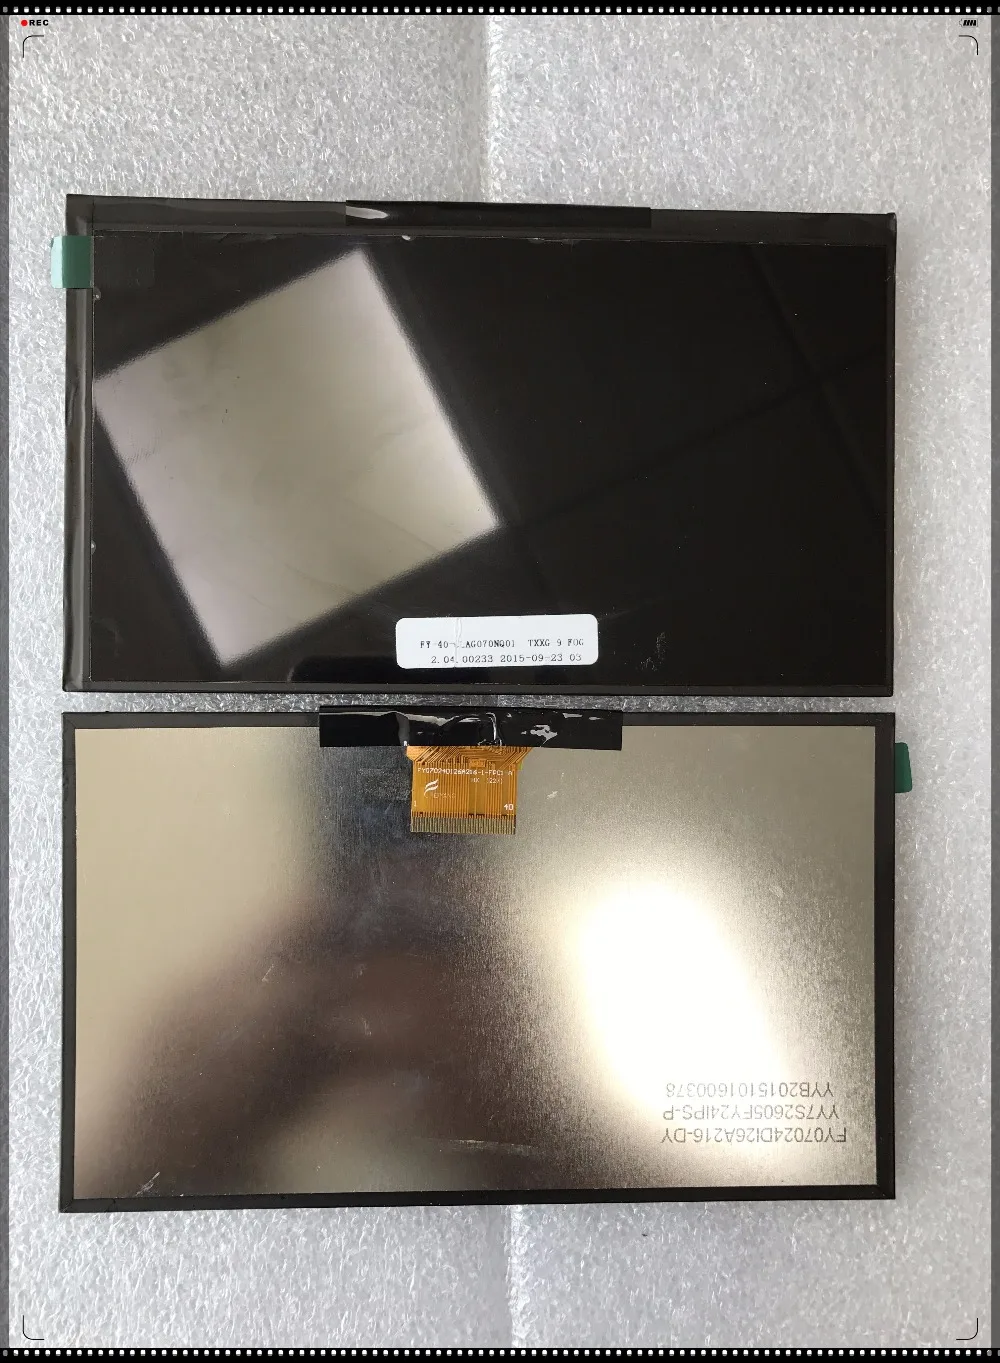 

high quality 7 inch 40P LCD screen within the screen number FY07024DI26A216-1-FPC1-A FY07024DI26A216-DY new LCD screen